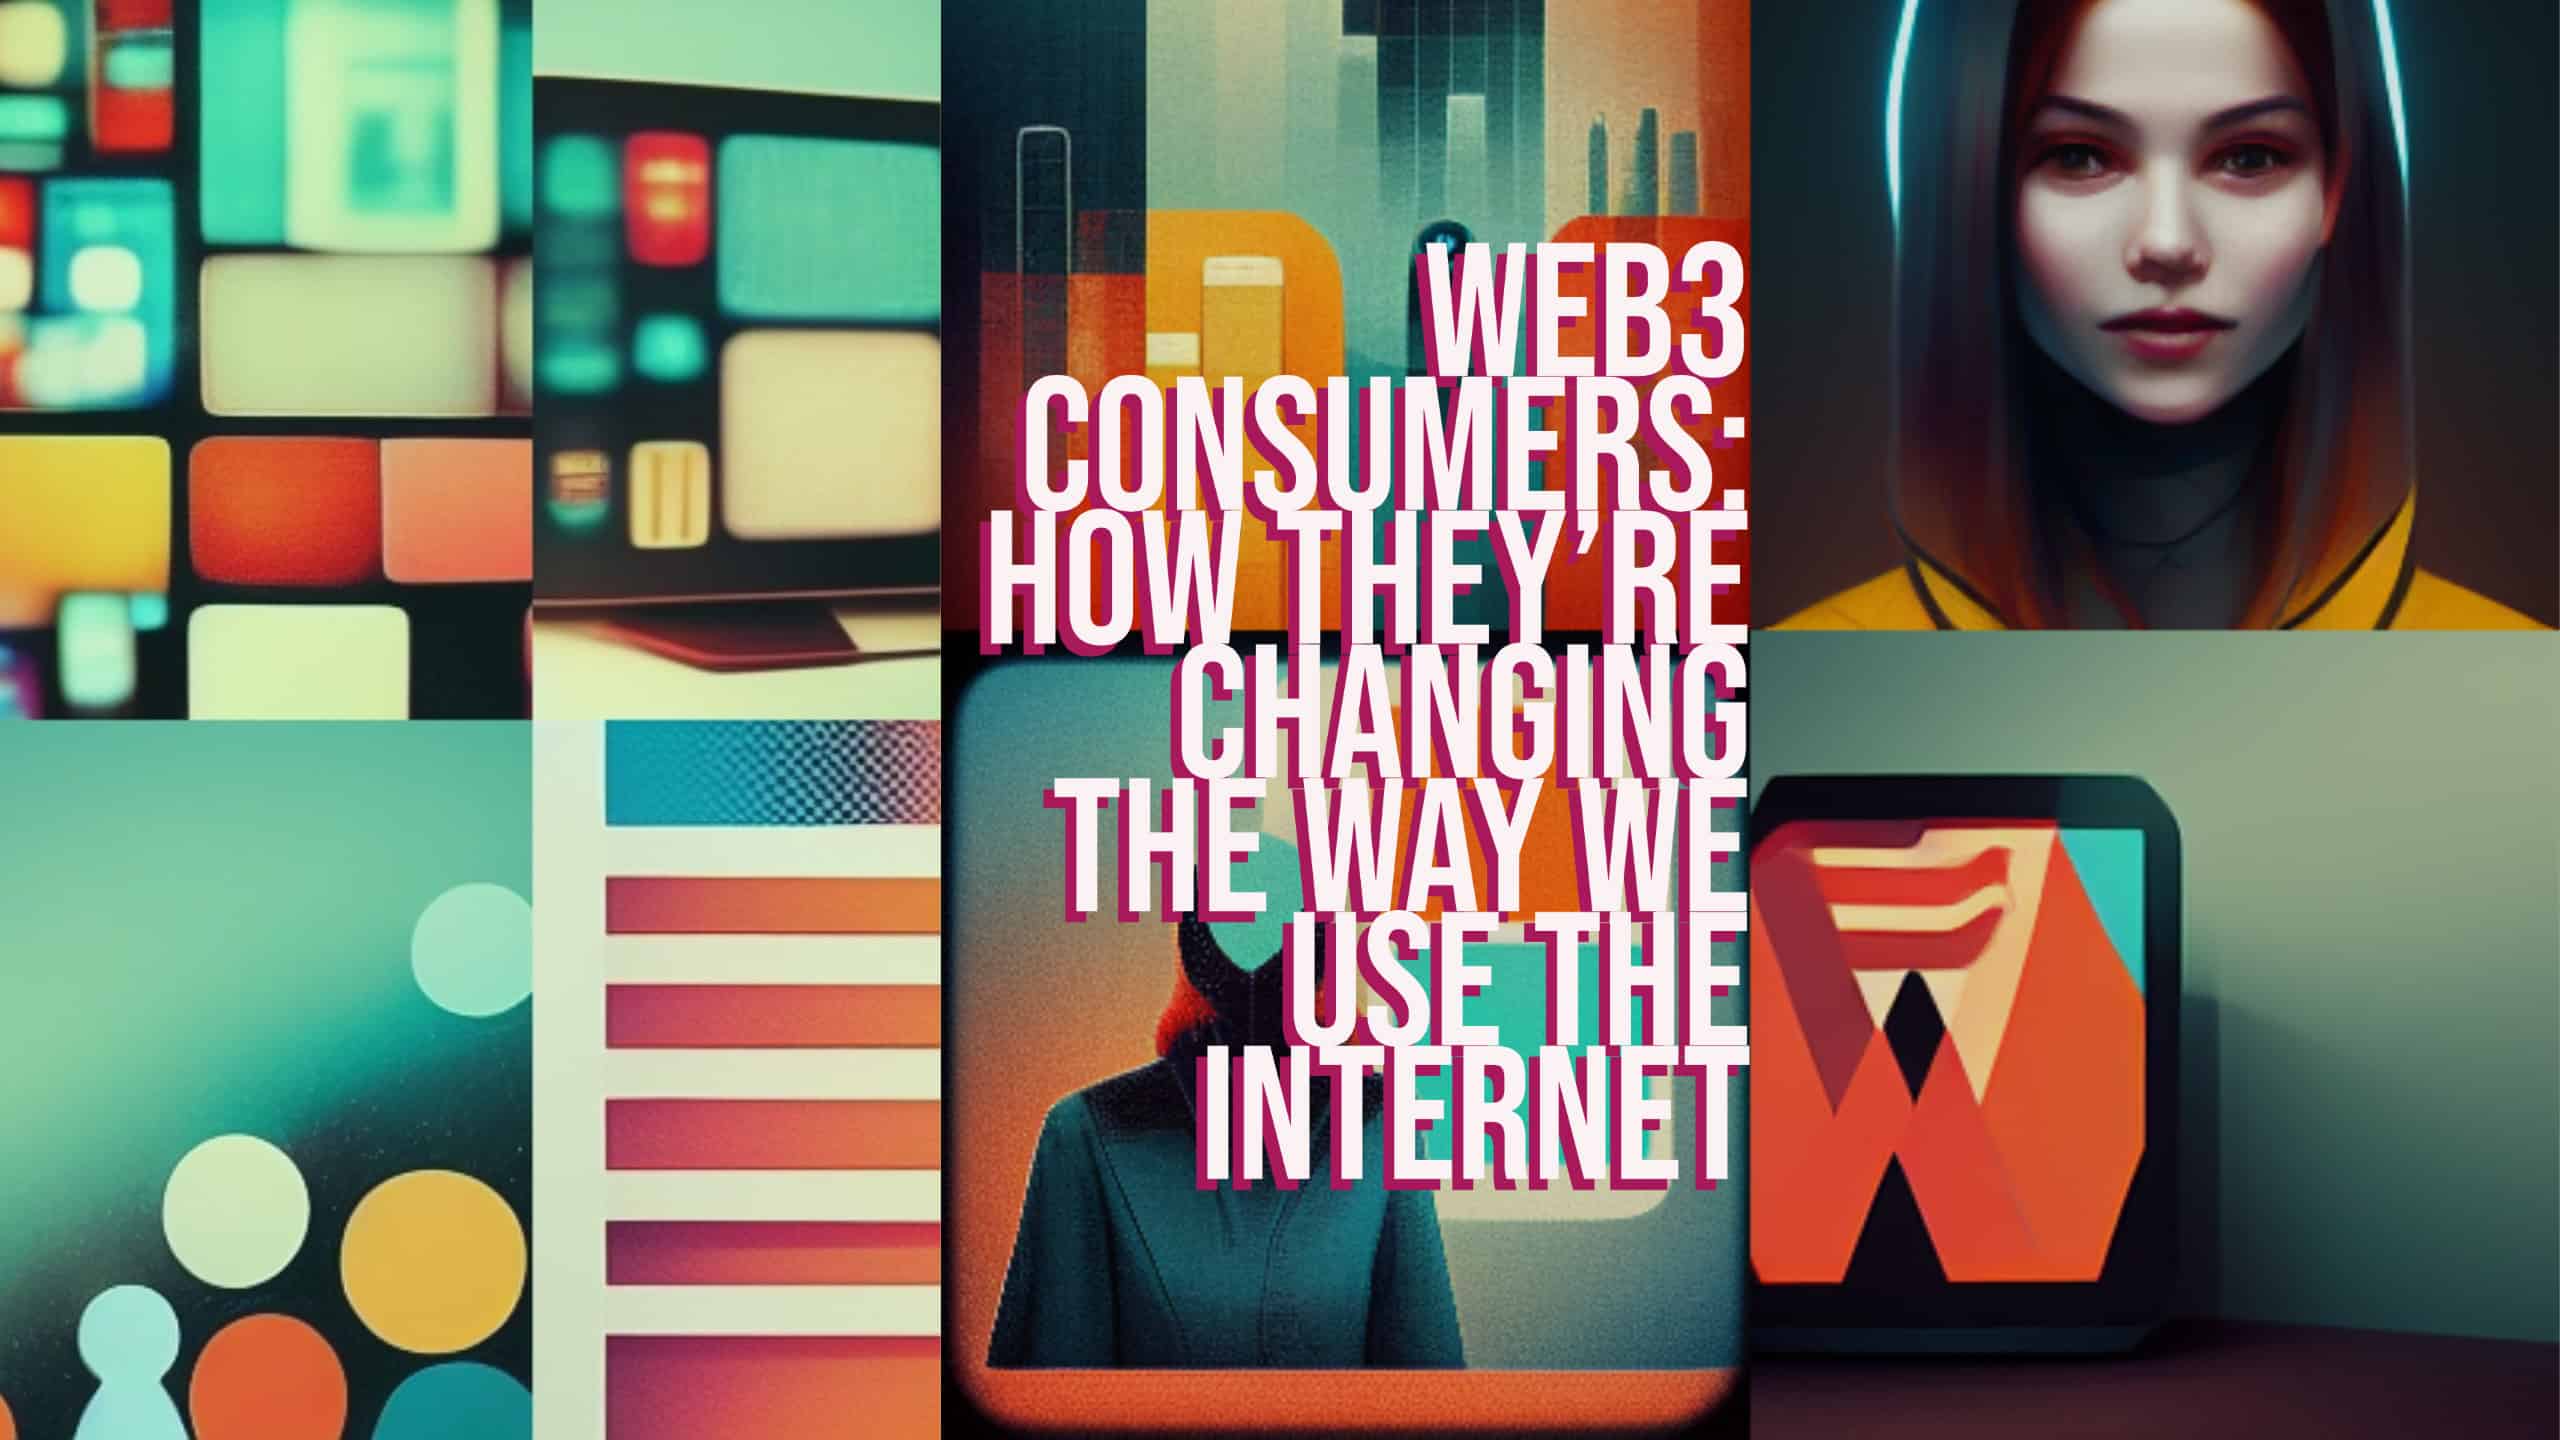 Web3 Consumers: How they’re changing the way we use the Internet